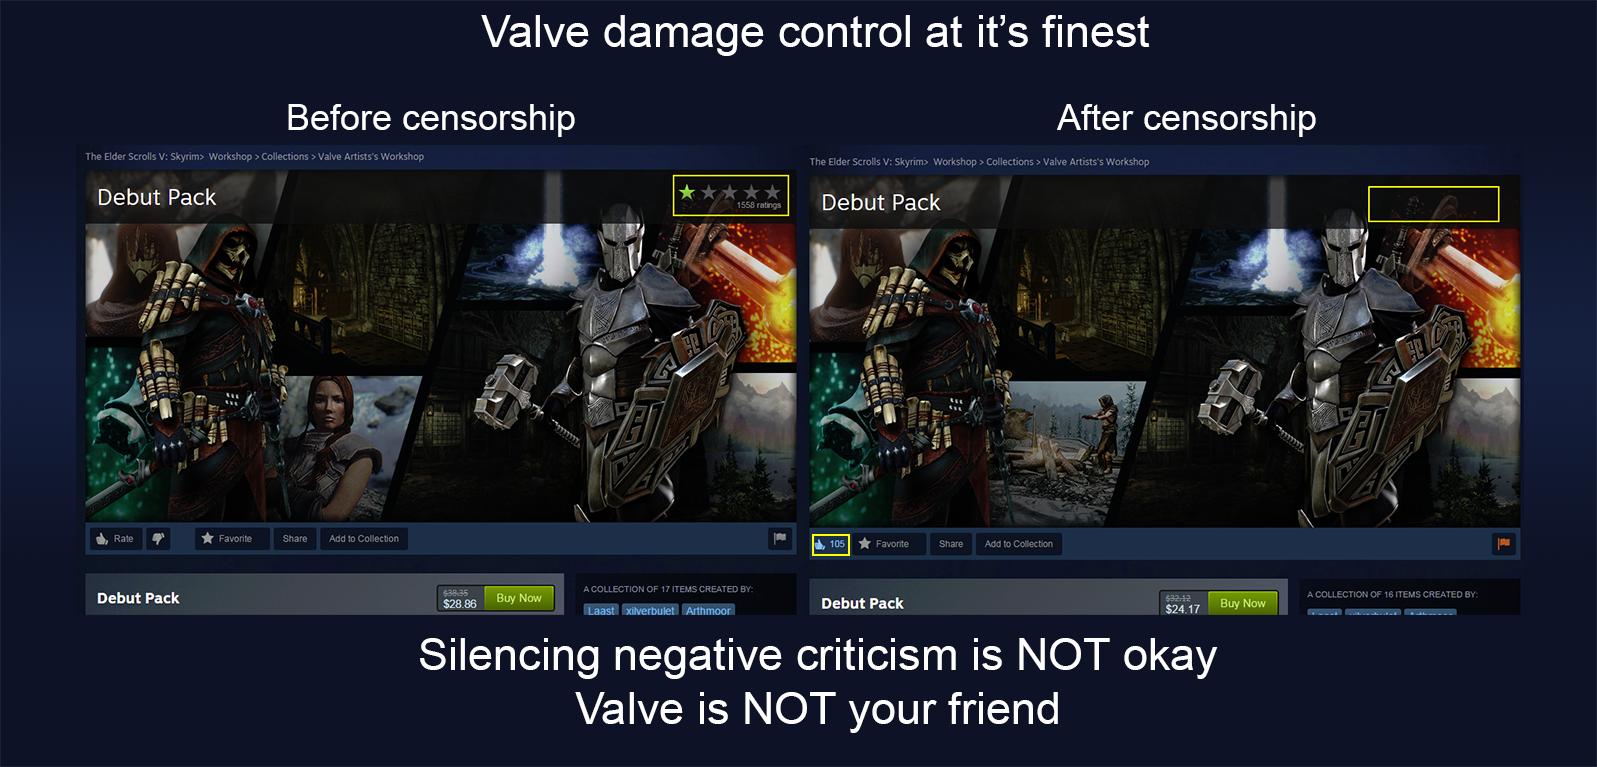 Valve's attempt at damage control